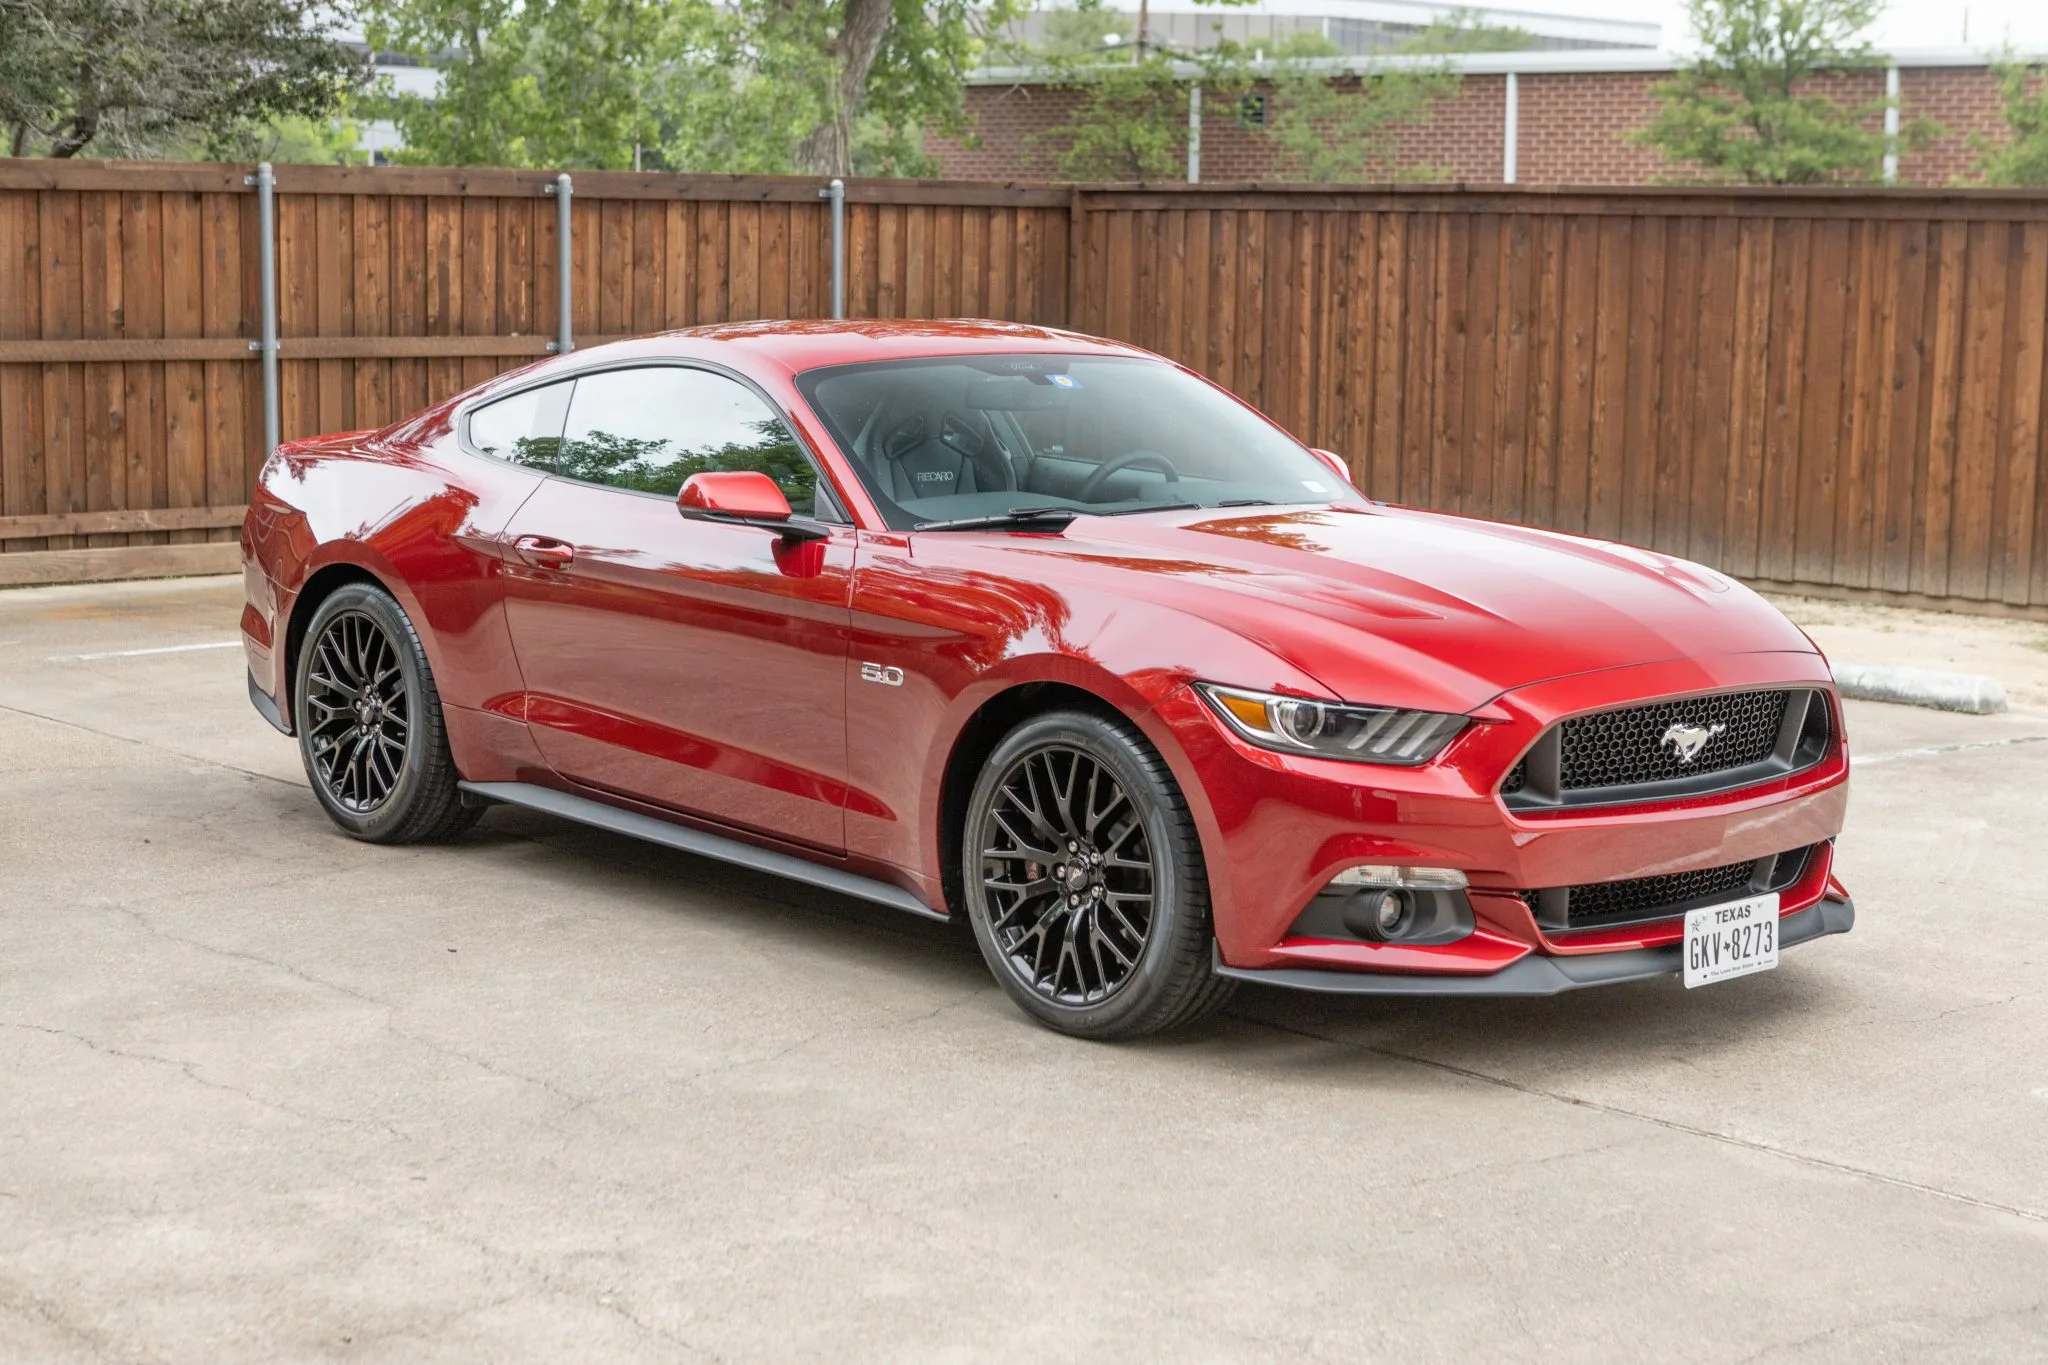 Mustang Of The Day: 2016 Ford Mustang GT